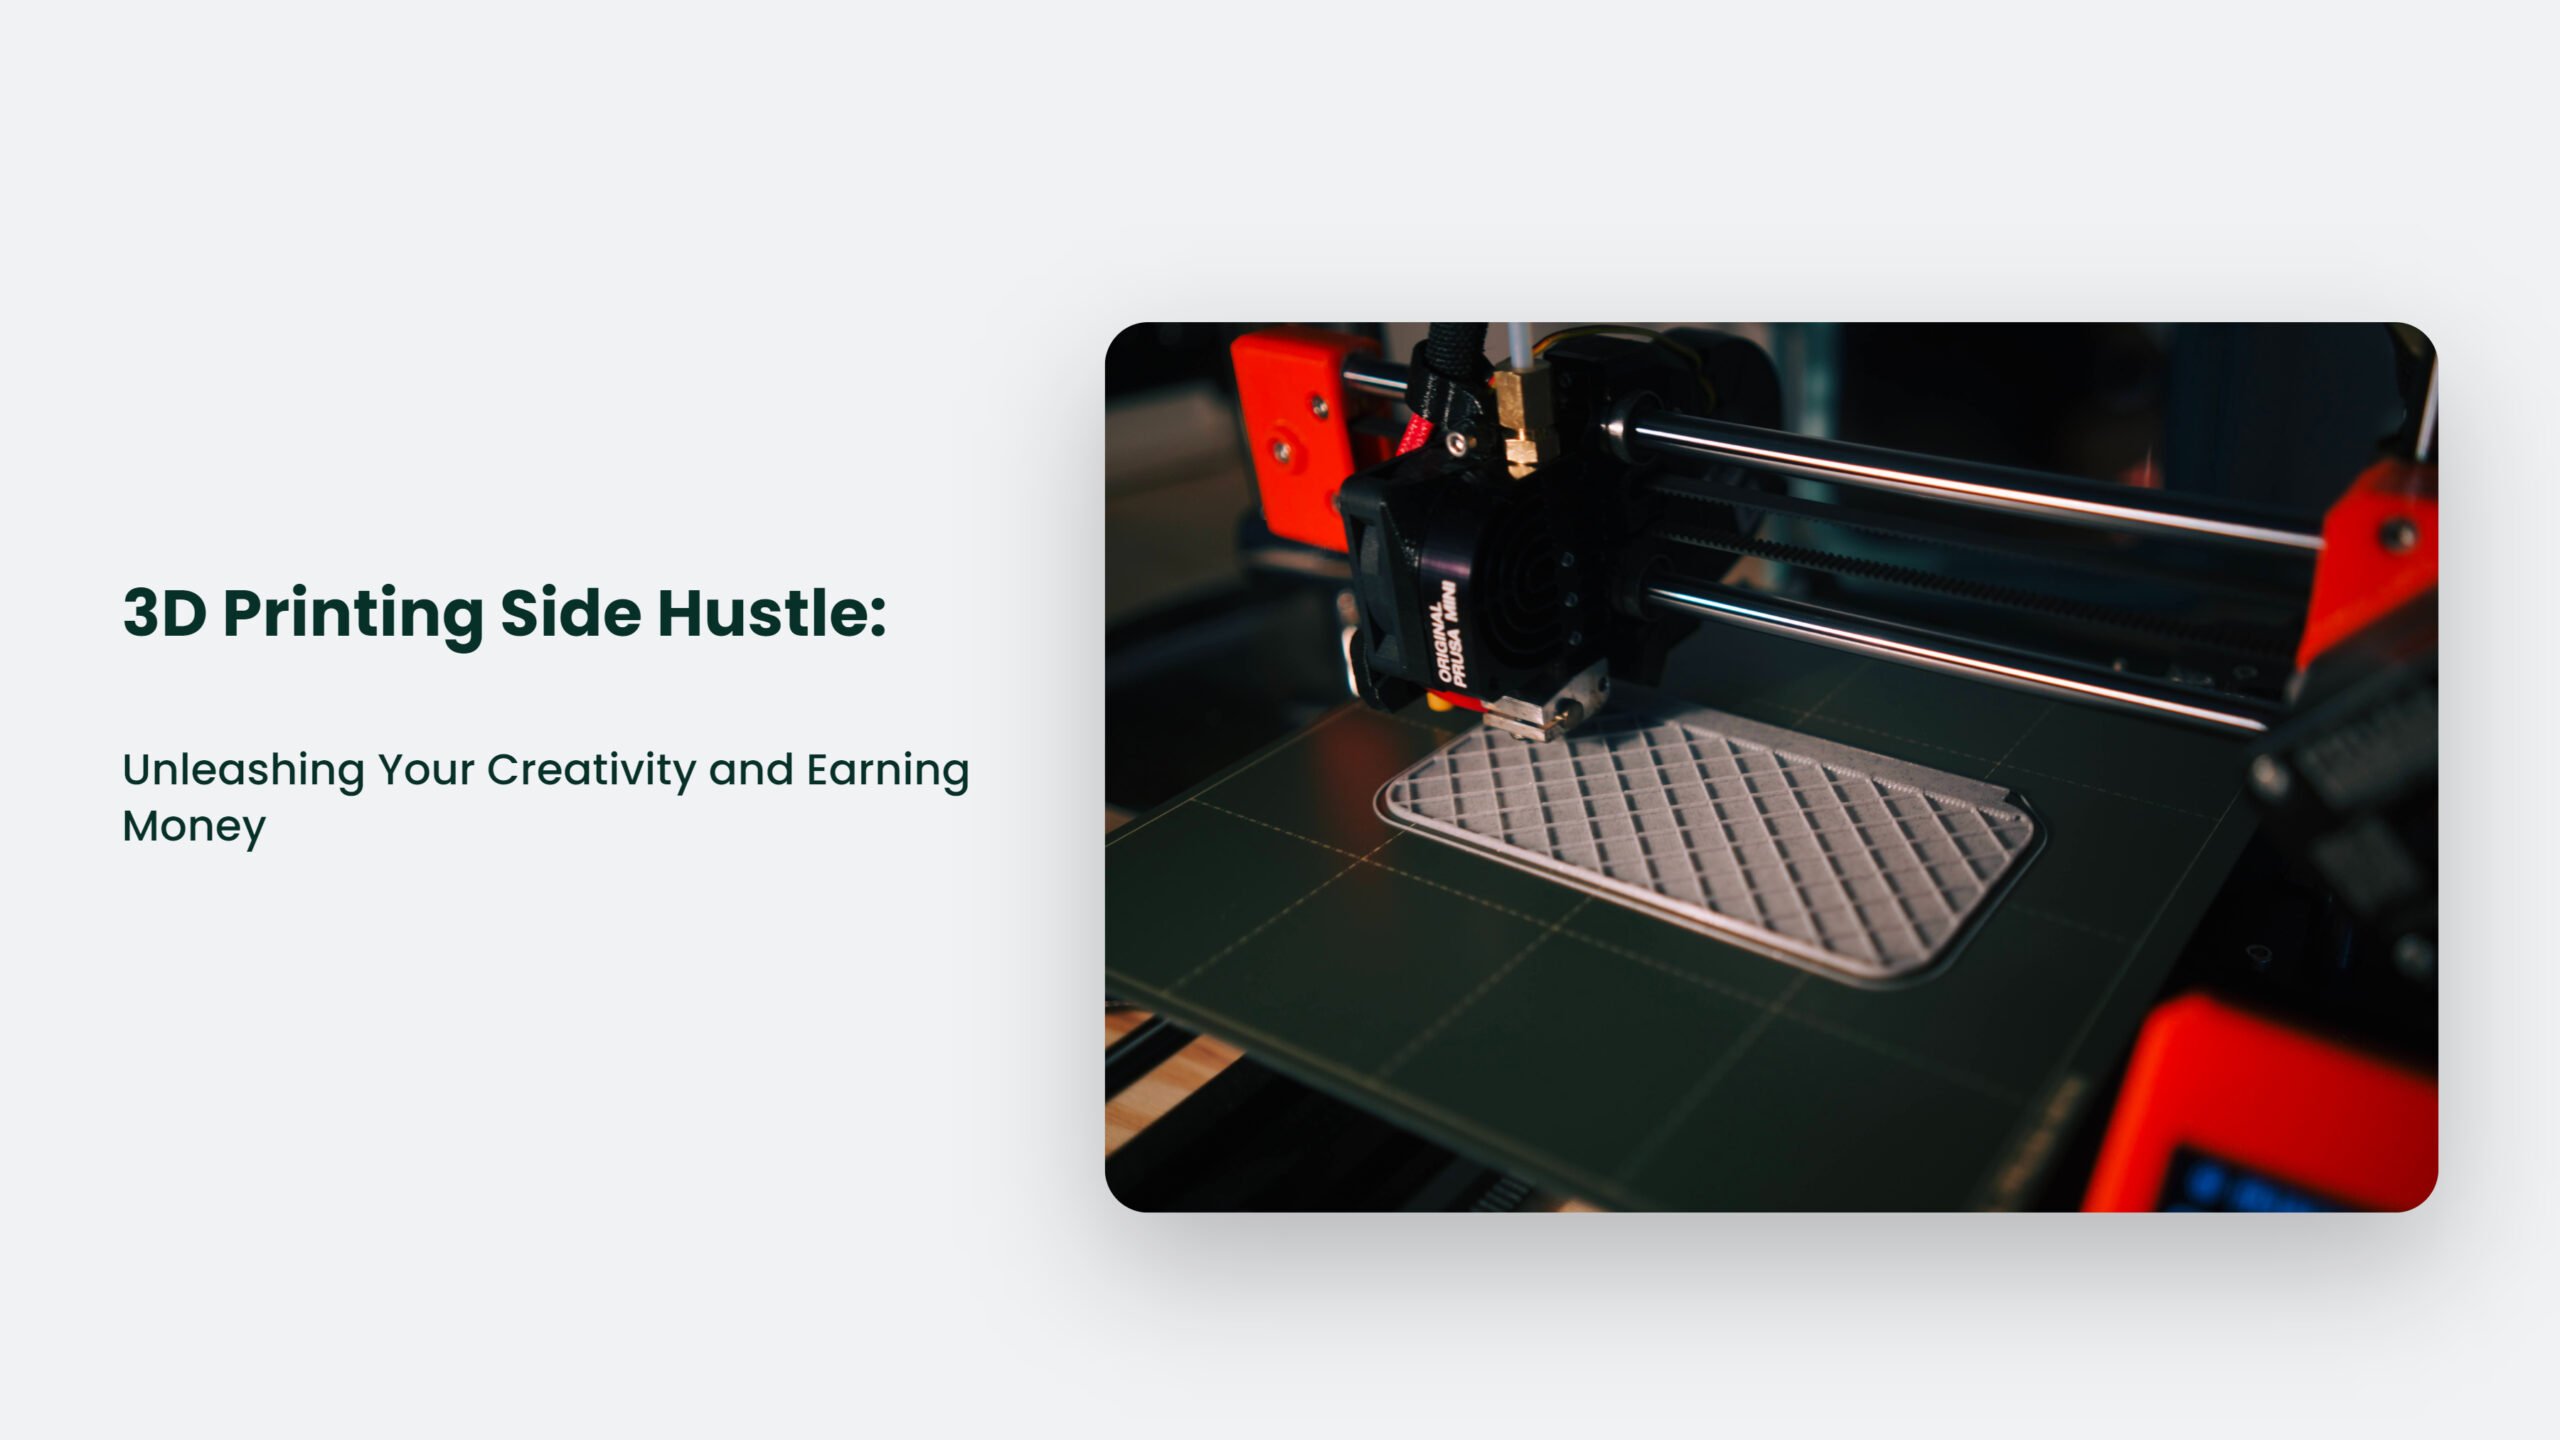 3D Printing Side Hustle: Unleashing Your Creativity And Earning Money 3D Printing Side Hustle